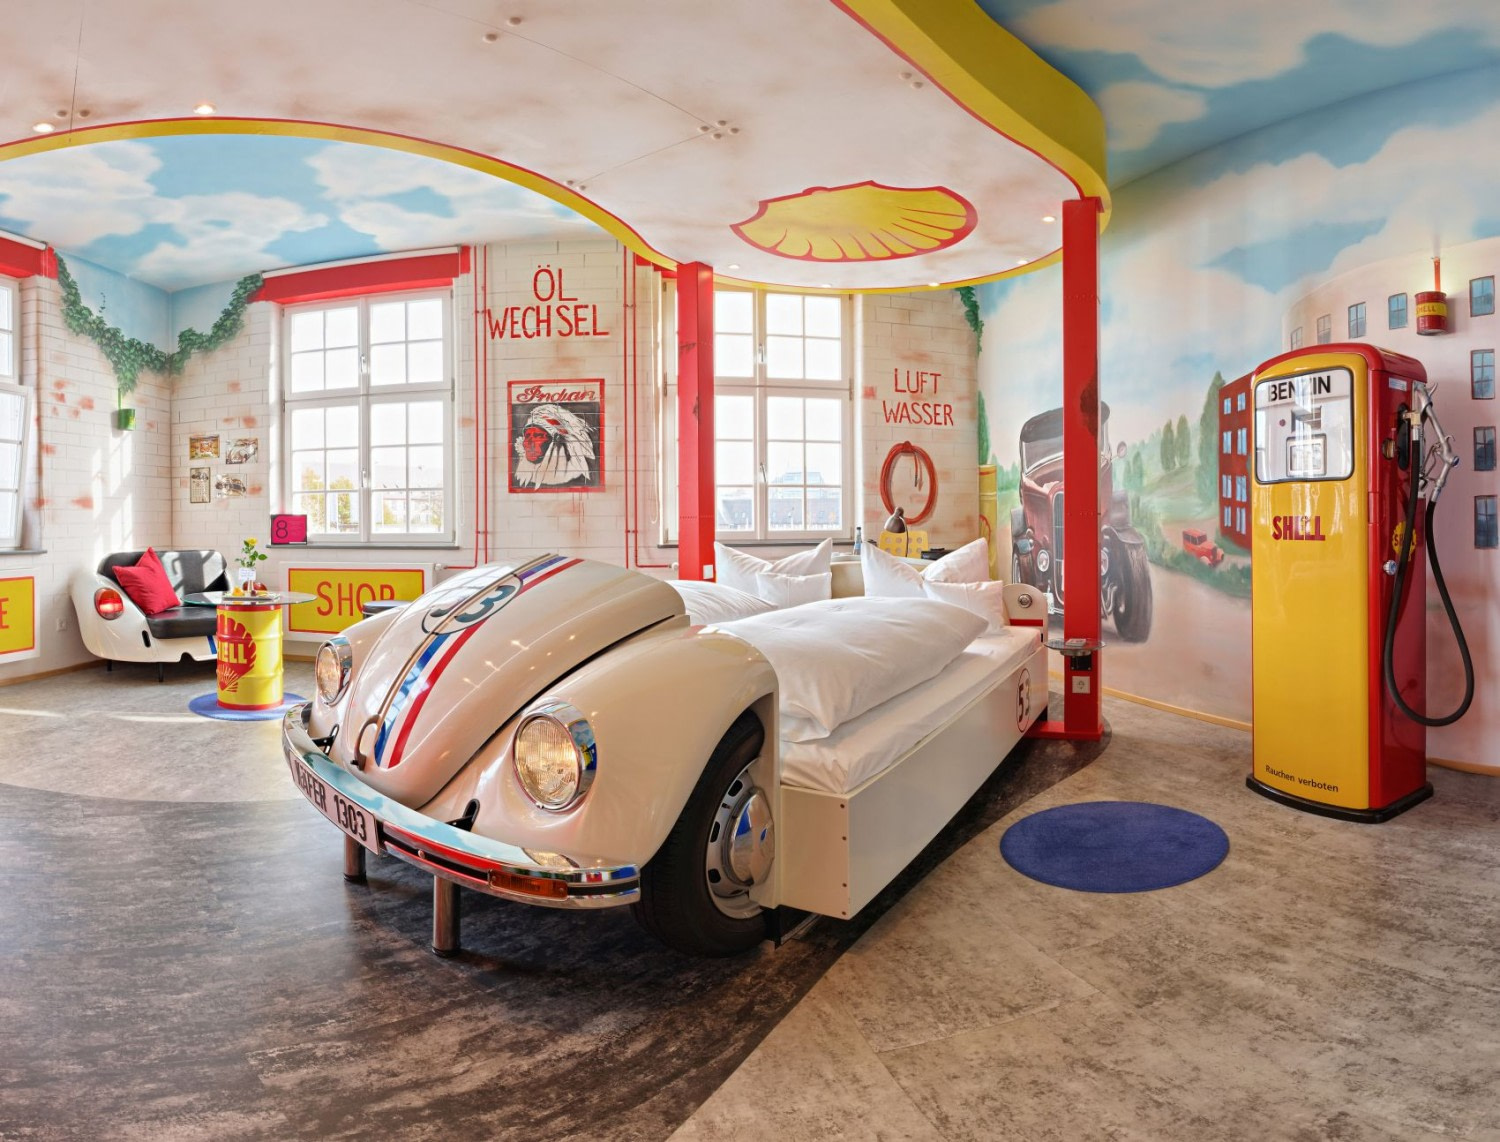 Car-themed hotel in Germany